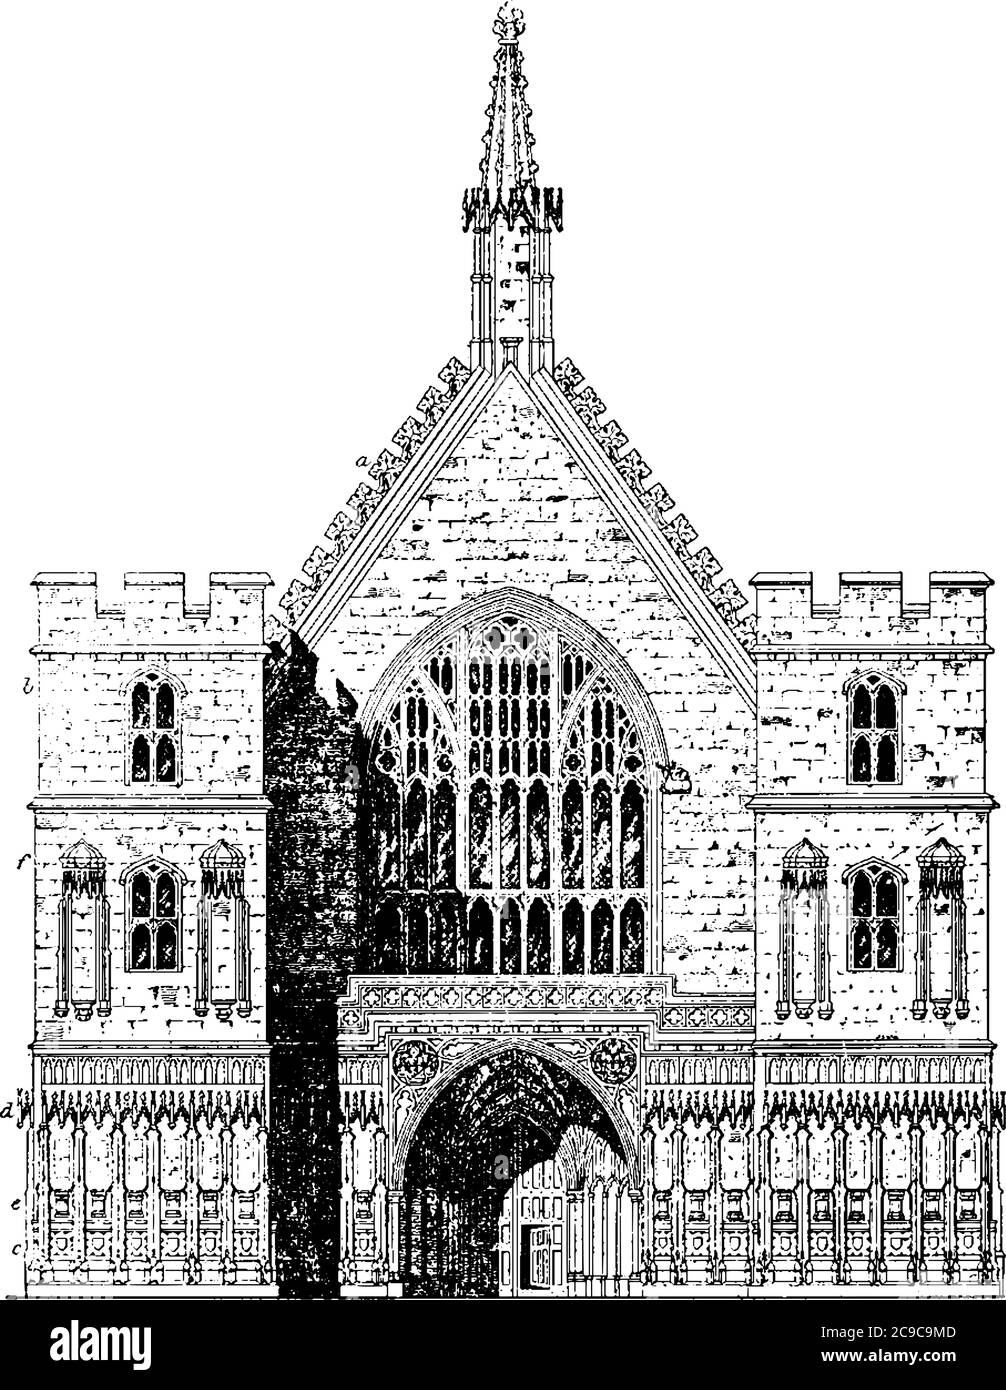 The palace of Westminster Hall, located on the banks of the River Thames, in the City of Westminster, in central London, England., vintage line drawin Stock Vector